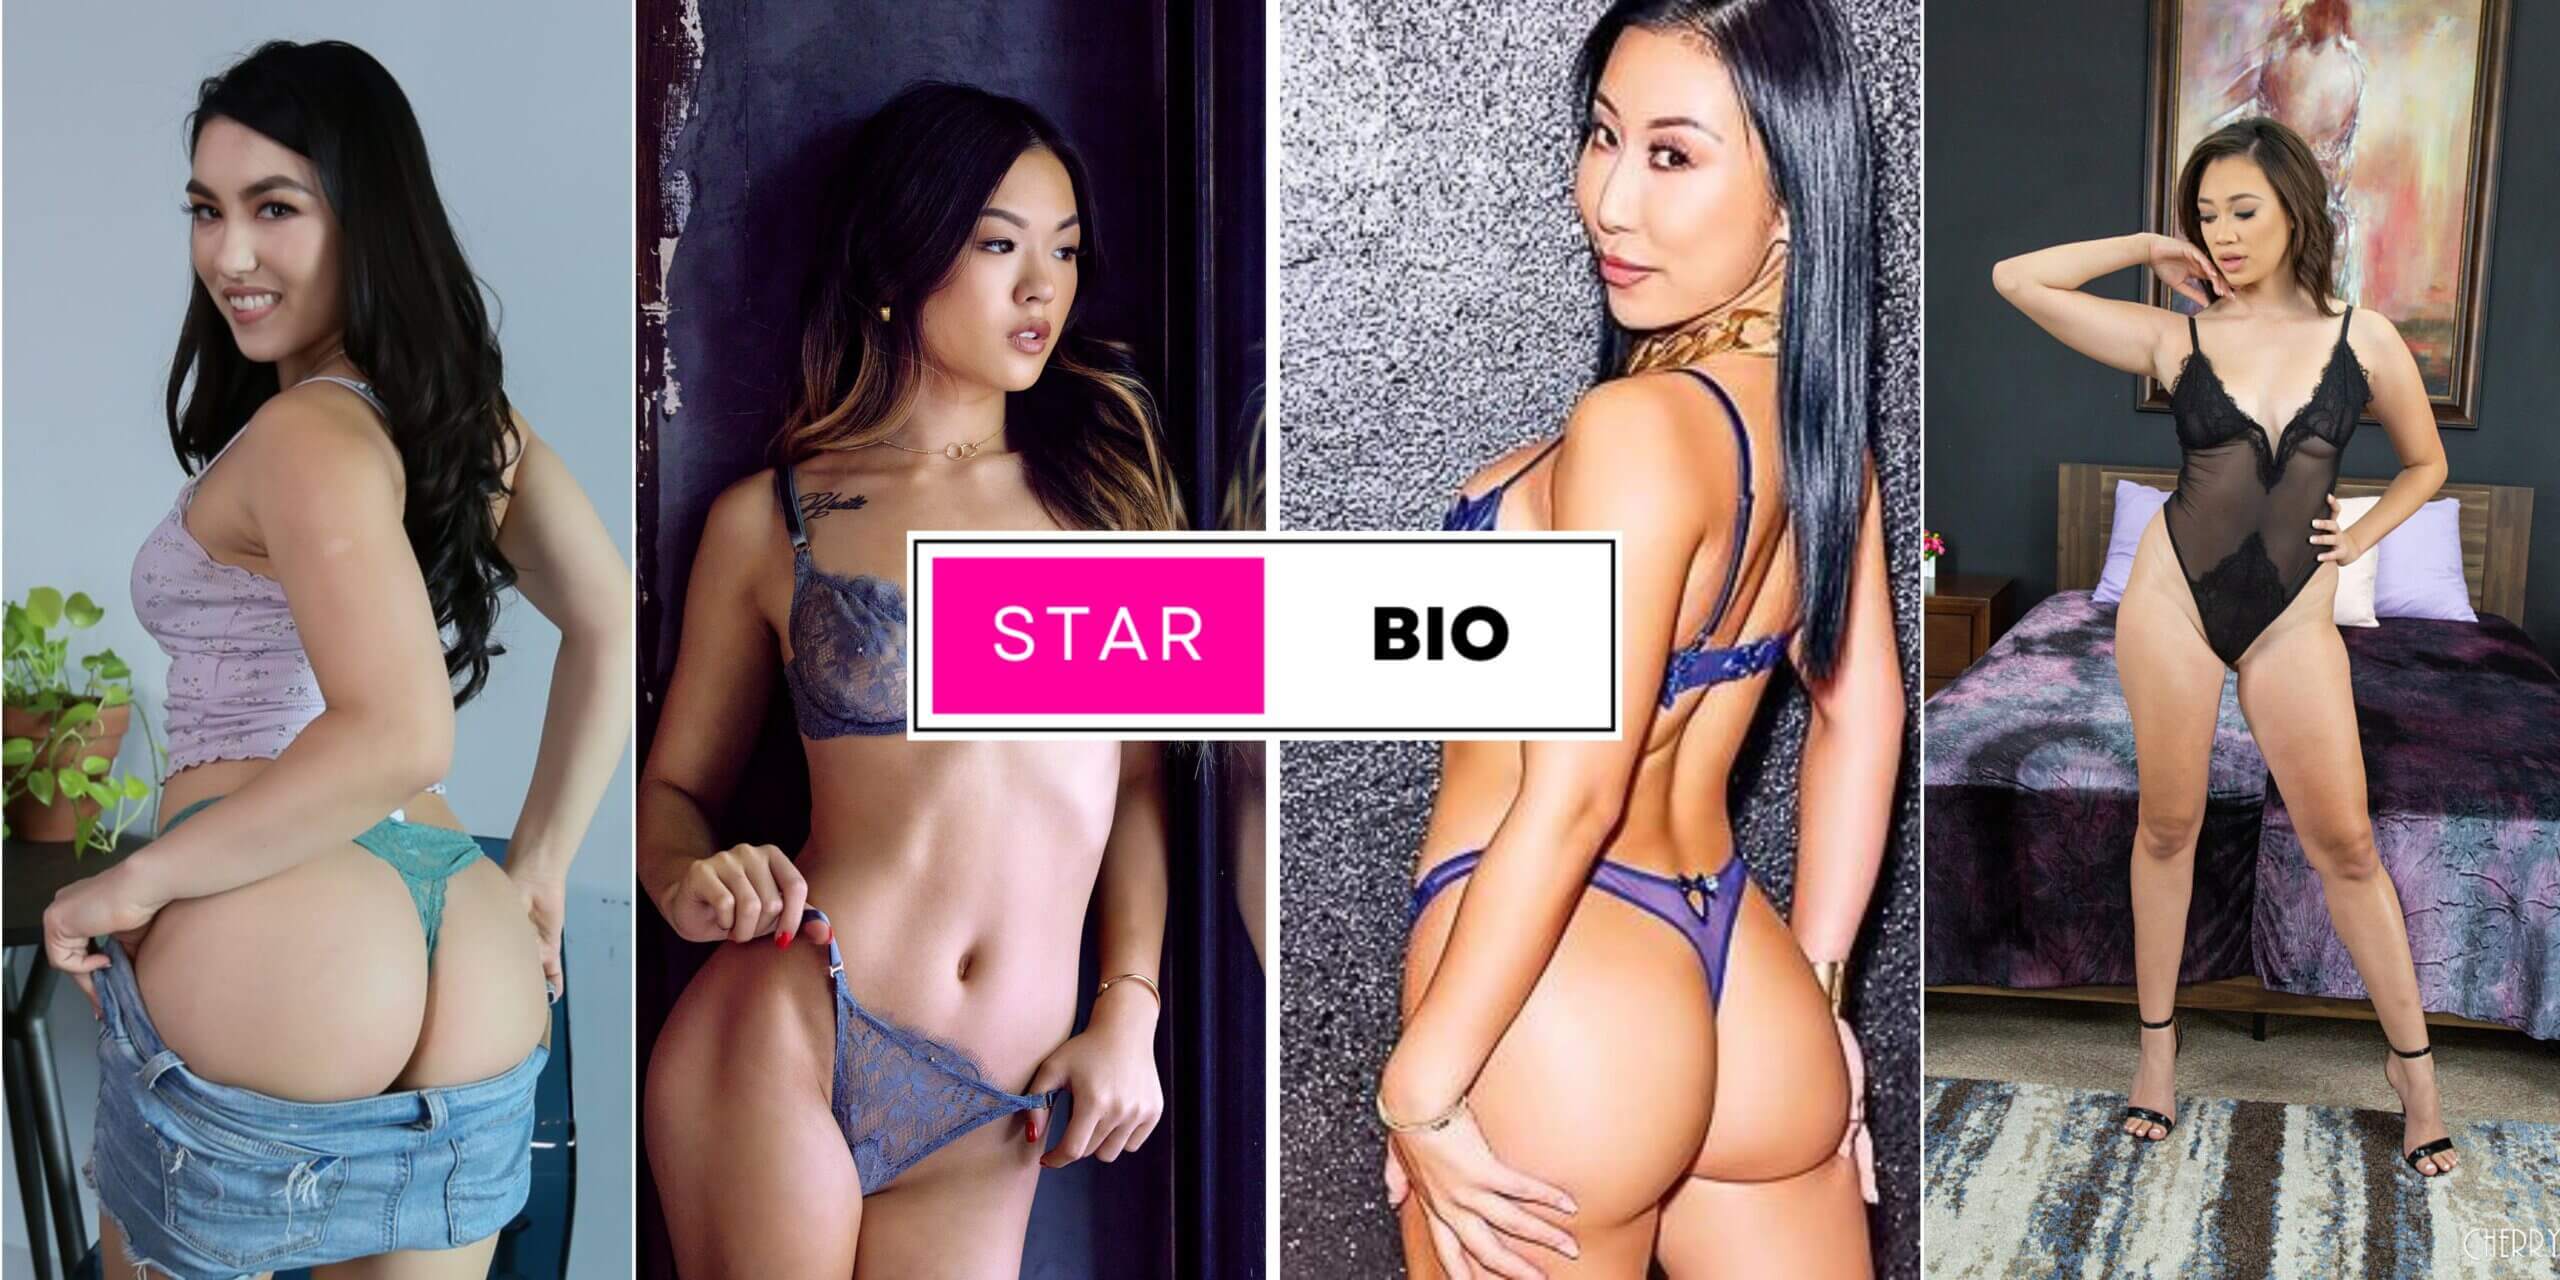 Top 10 New Asian Pornstars - With 1080p free Download